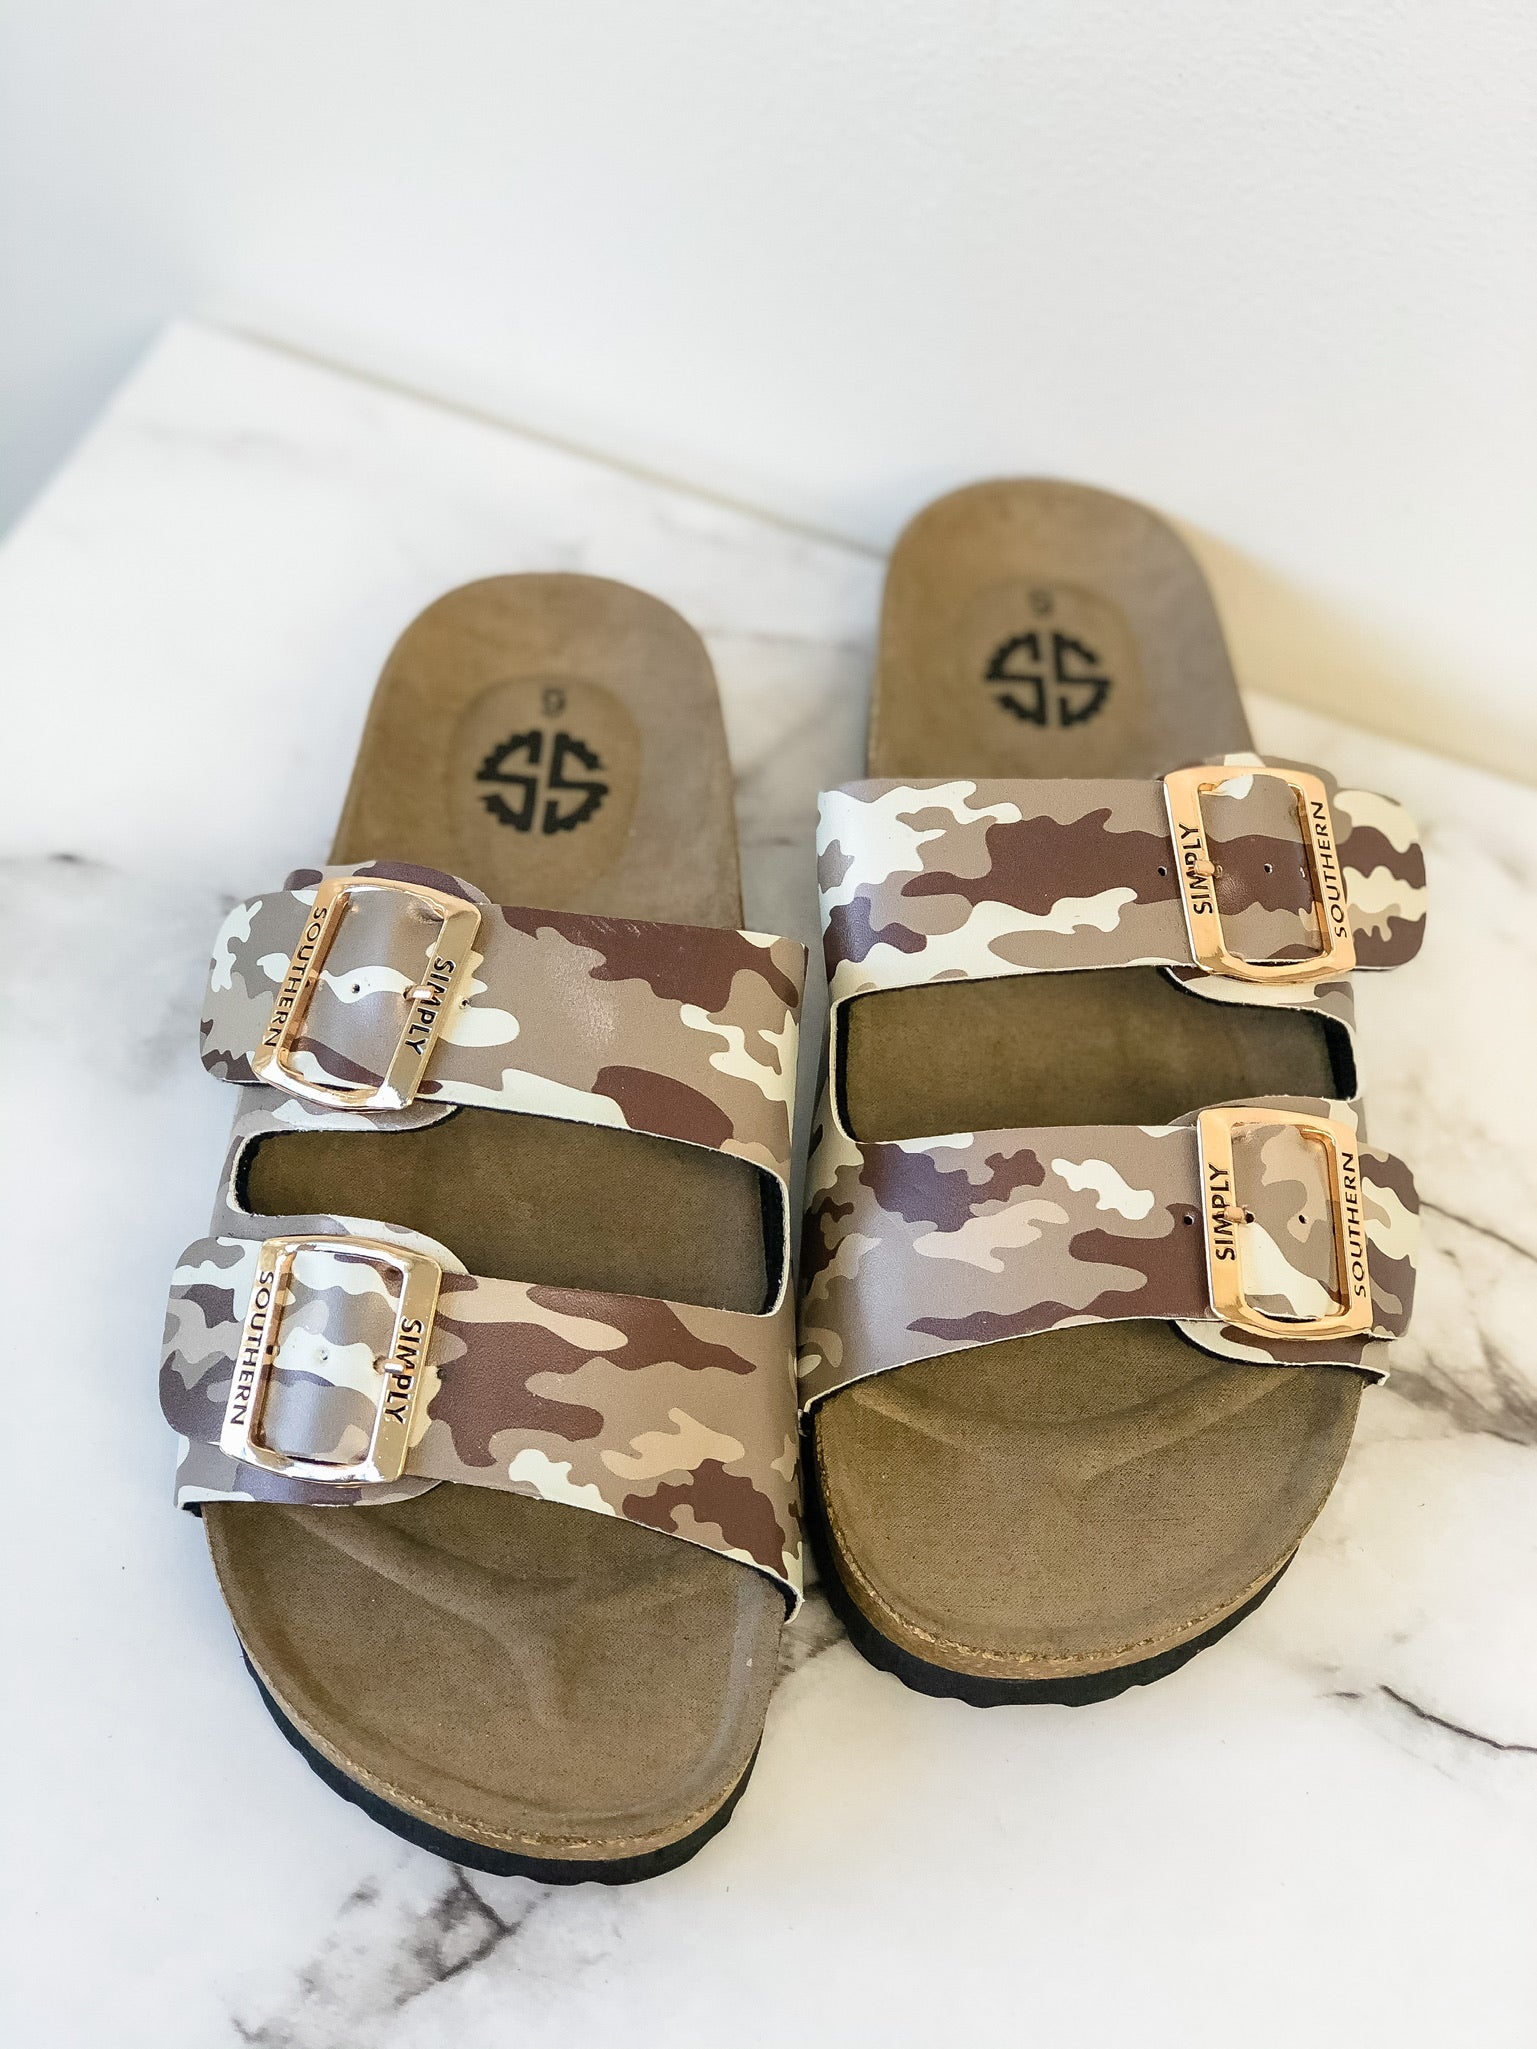 simply southern sandals double strap